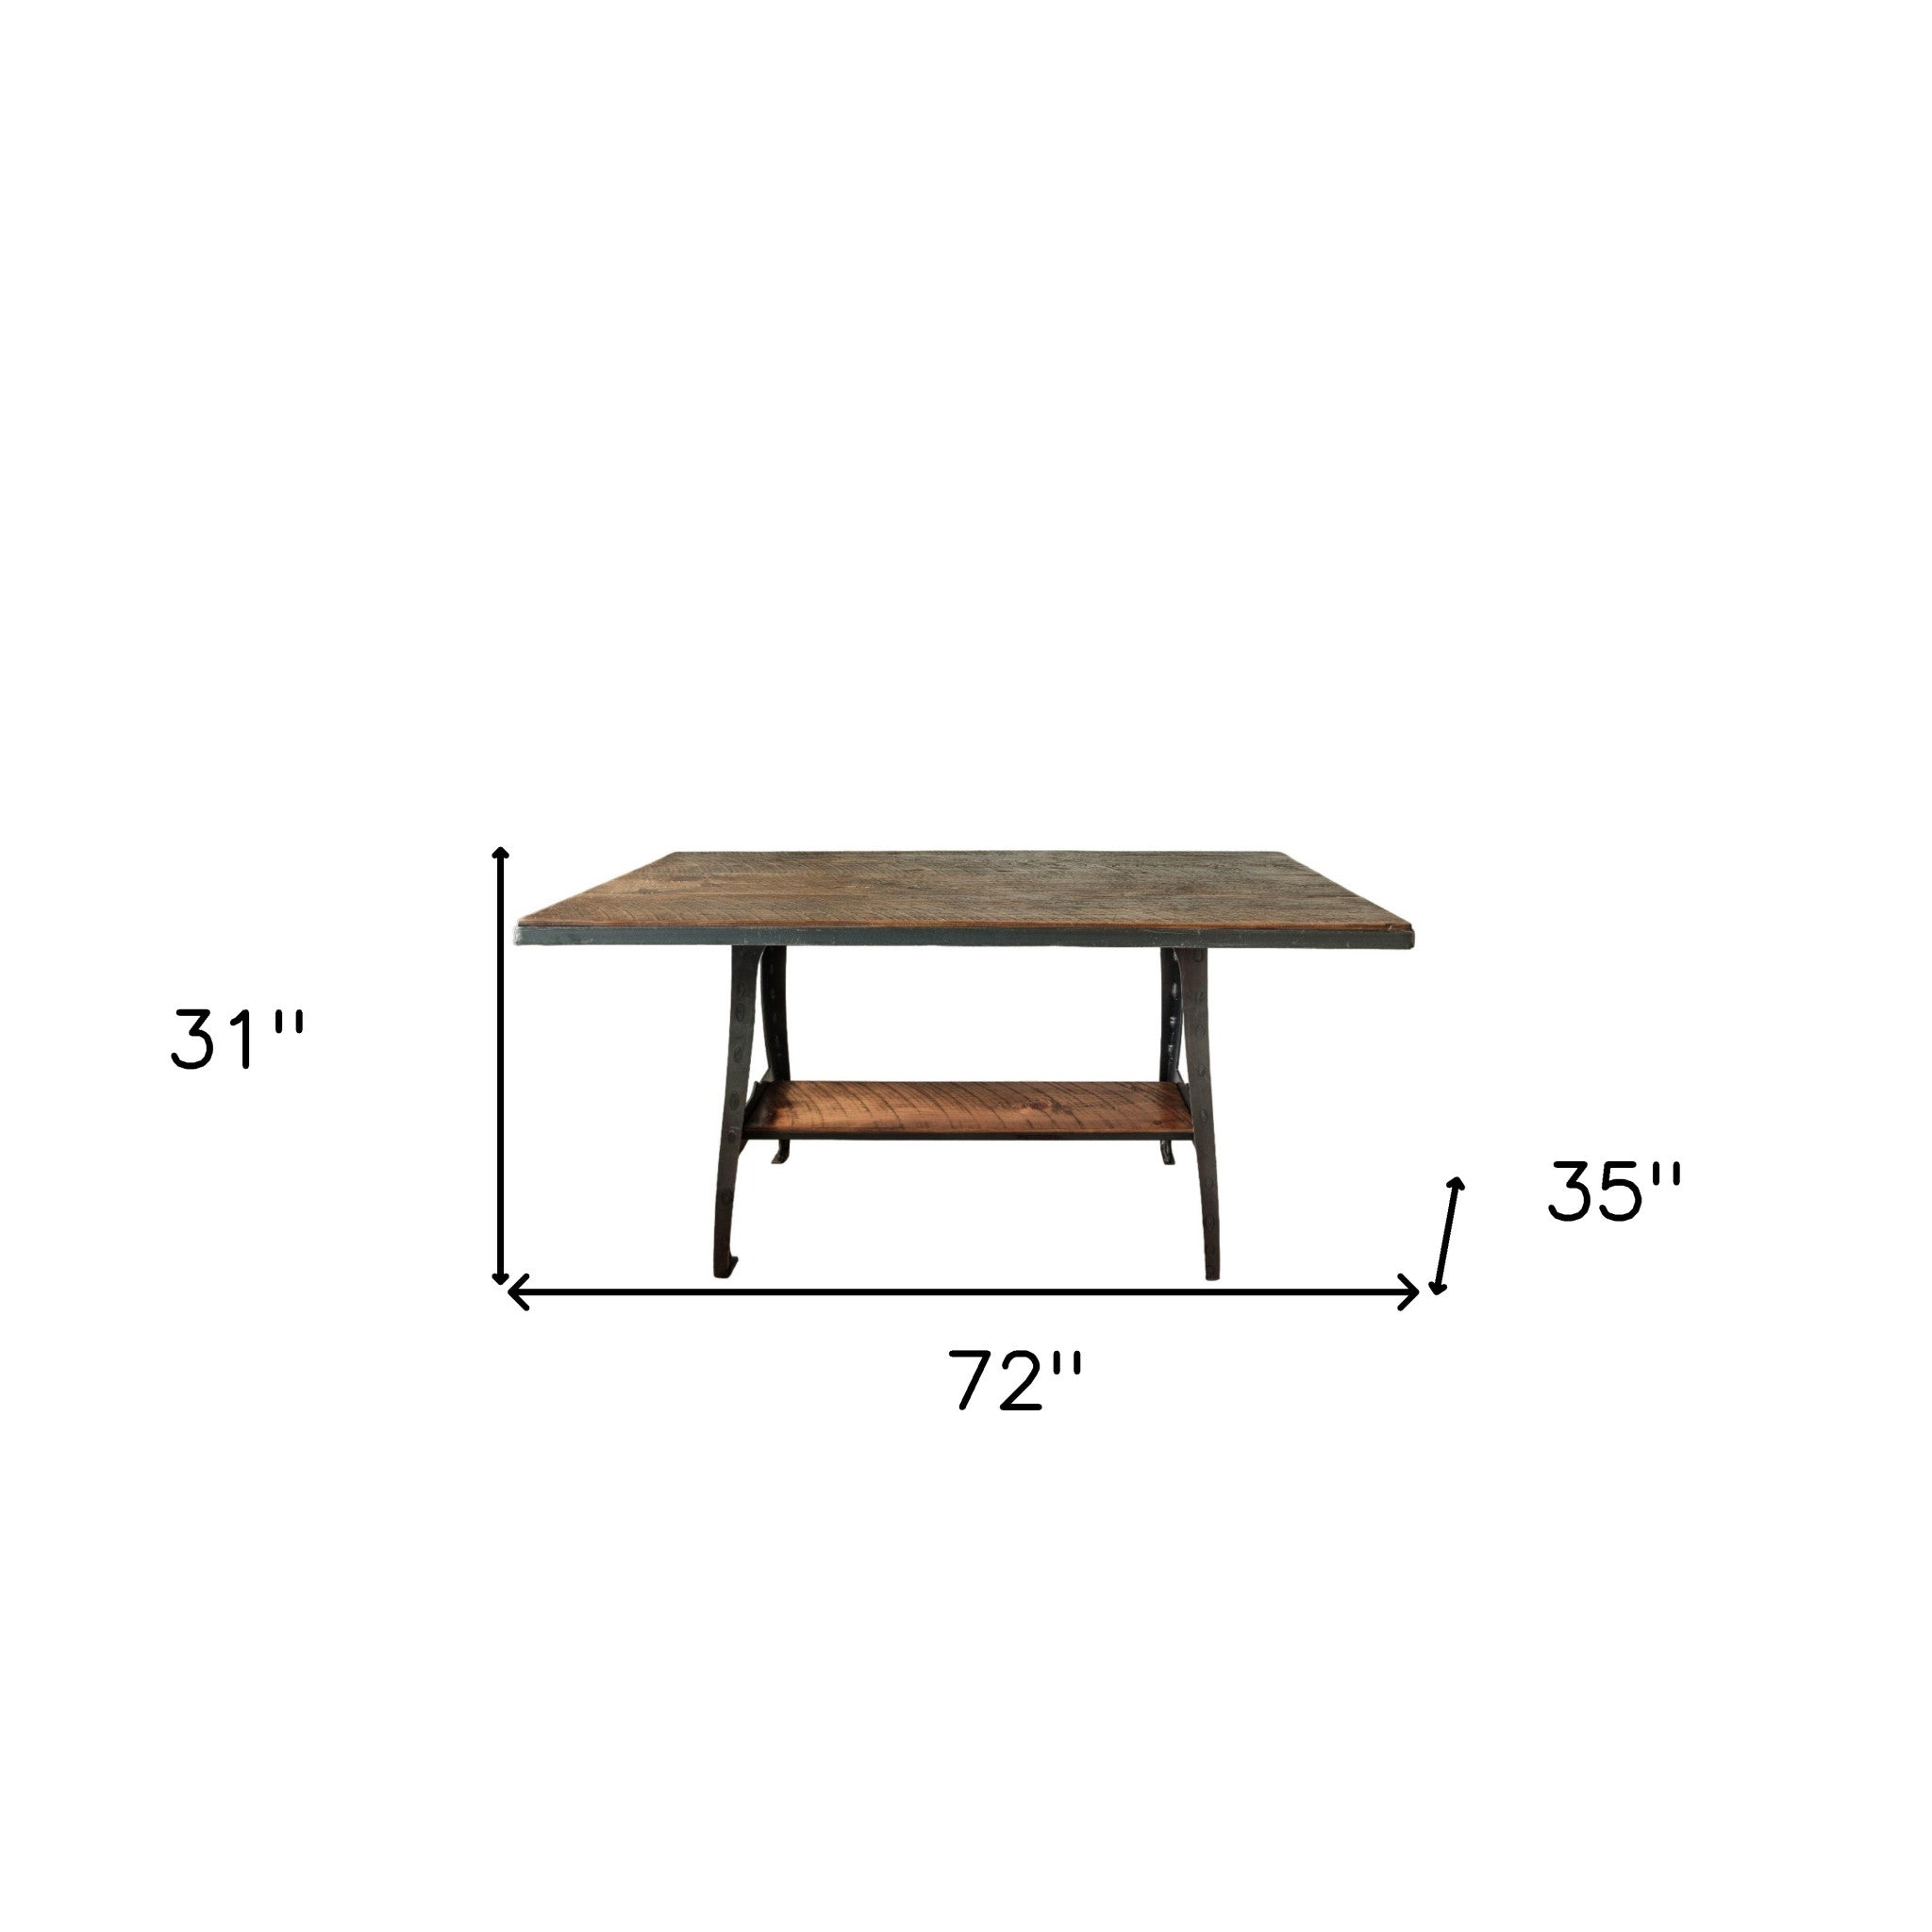 72" Brown And Black Solid Wood And Steel Dining Table